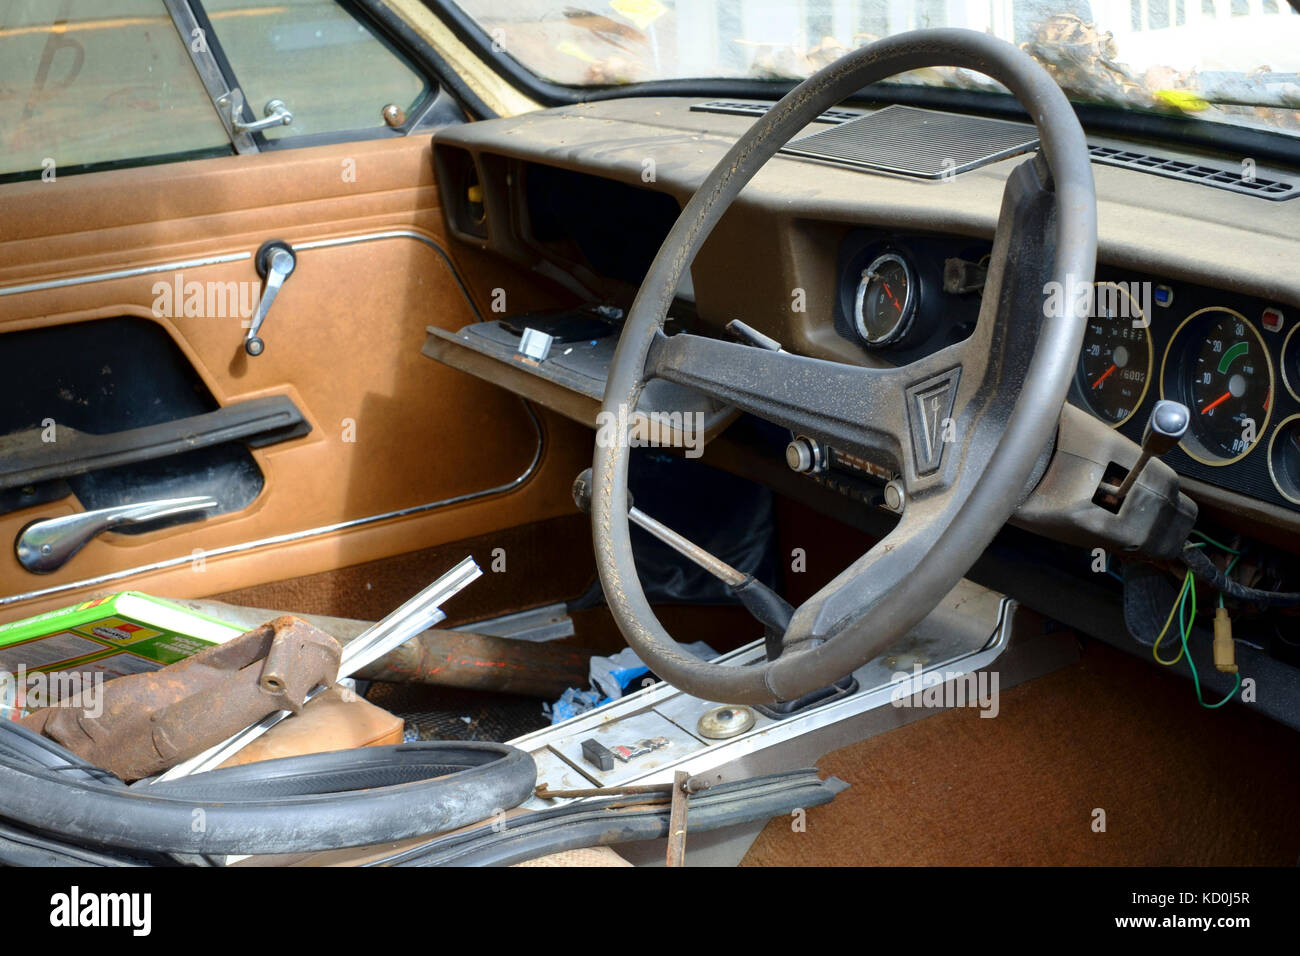 a barn find of a british sunbeam rapier car from the 1970s ready for restoration as a project interior view Stock Photo